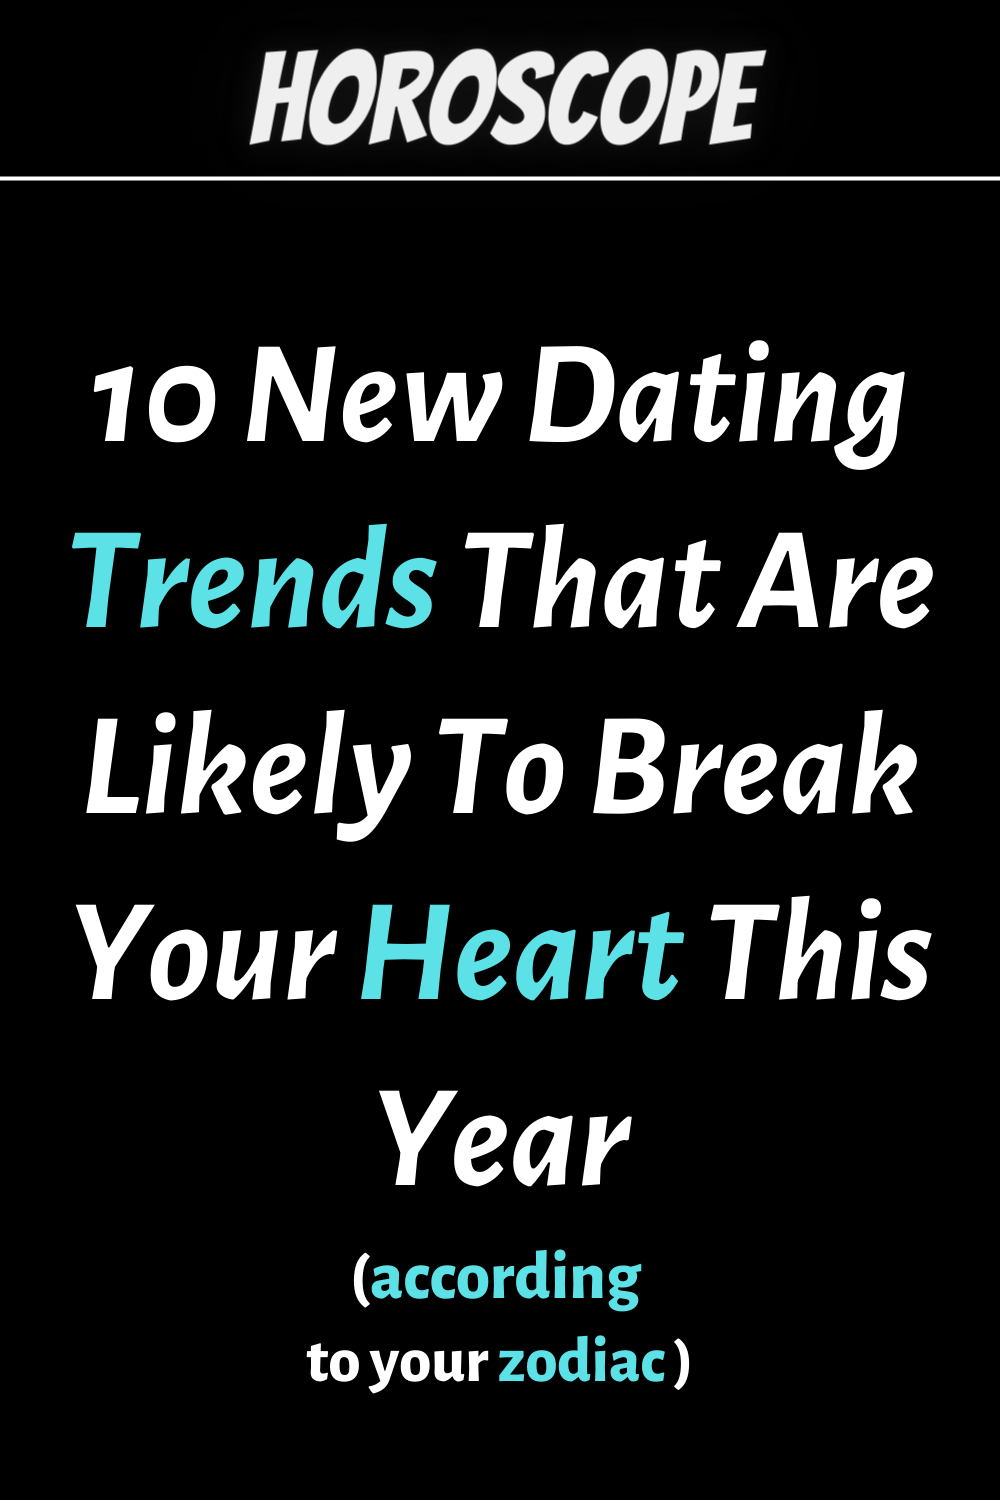 10 New Dating Trends That Are Likely To Break Your Heart This Year